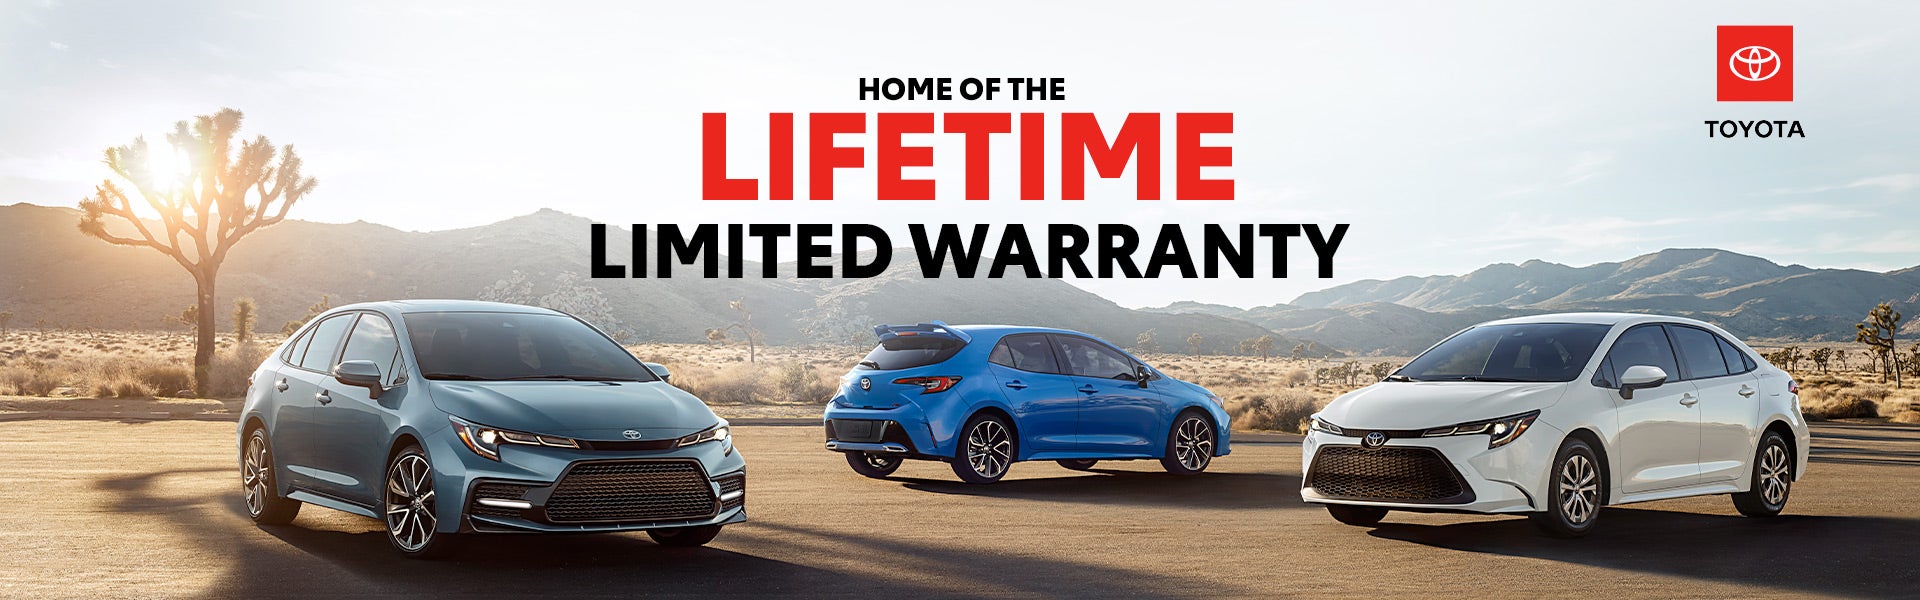 Home of Lifetime Limited Warranty